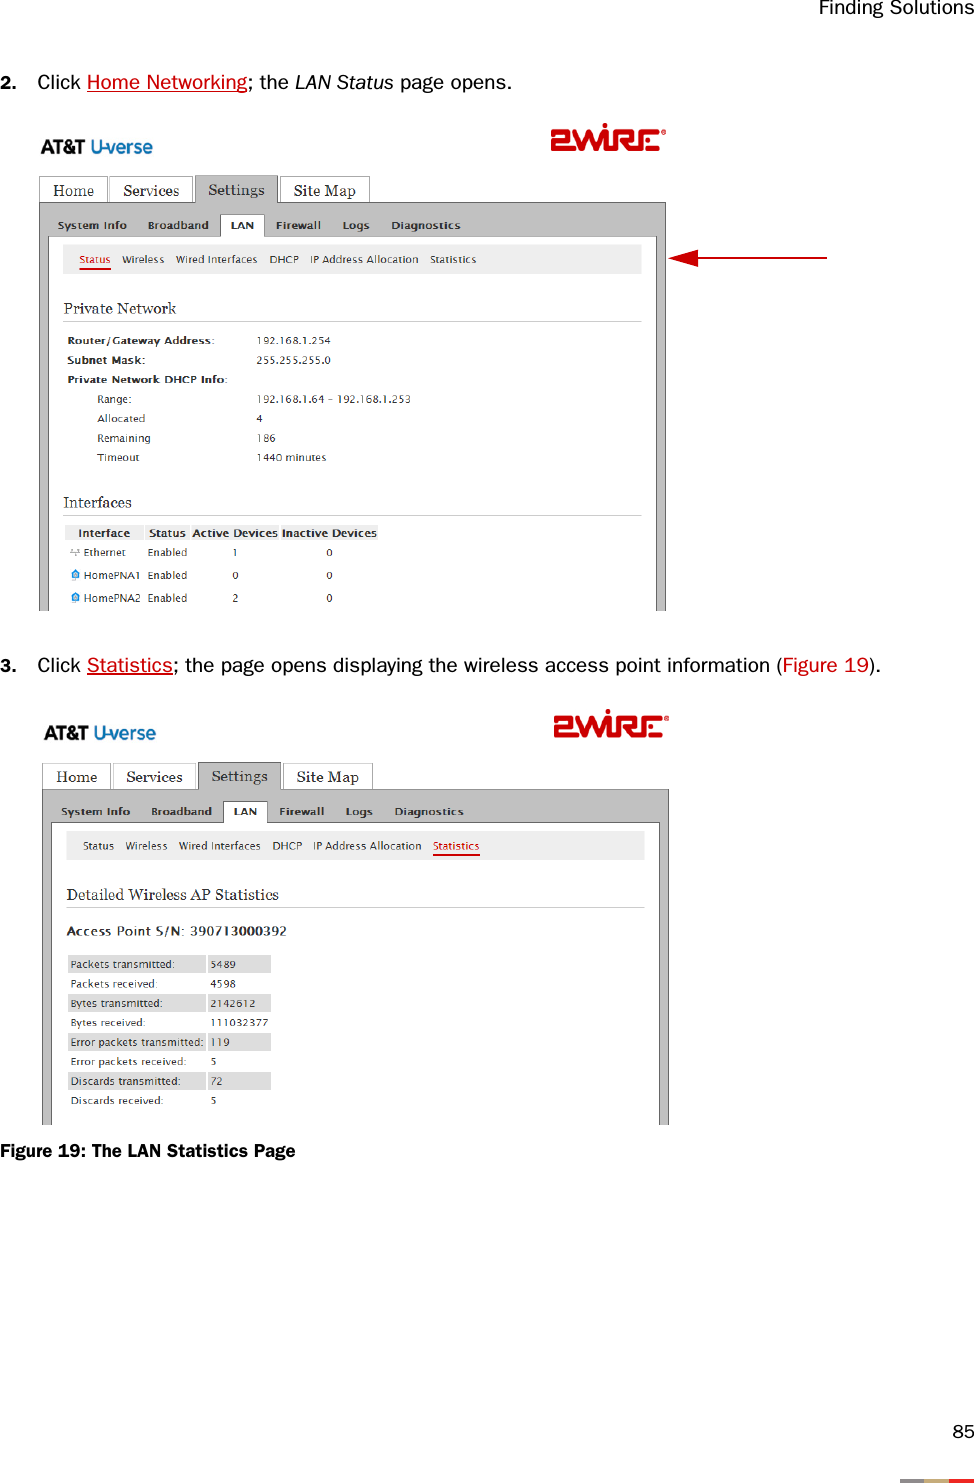 Finding Solutions852. Click Home Networking; the LAN Status page opens.3. Click Statistics; the page opens displaying the wireless access point information (Figure 19).Figure 19: The LAN Statistics Page